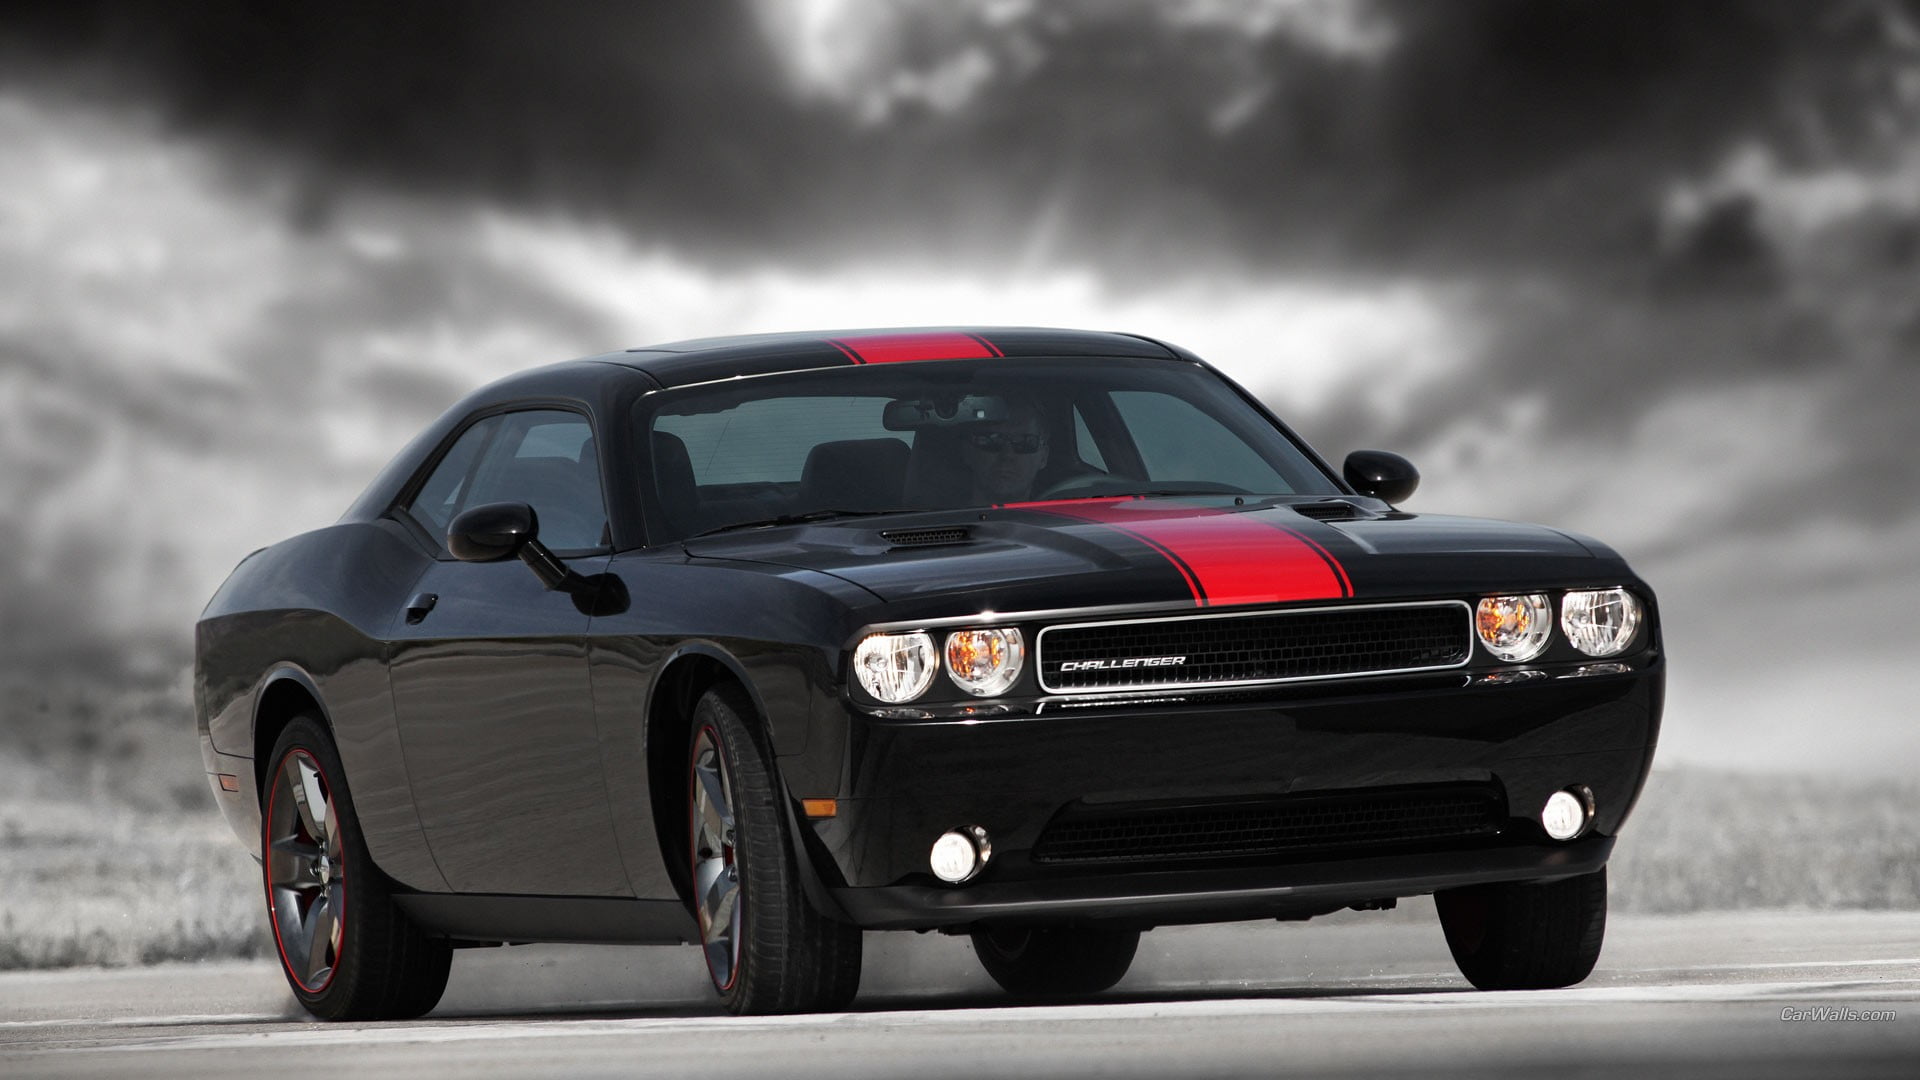 Black And Red Sports Car Dodge Challenger Car Hd Wallpaper Wallpaper Flare